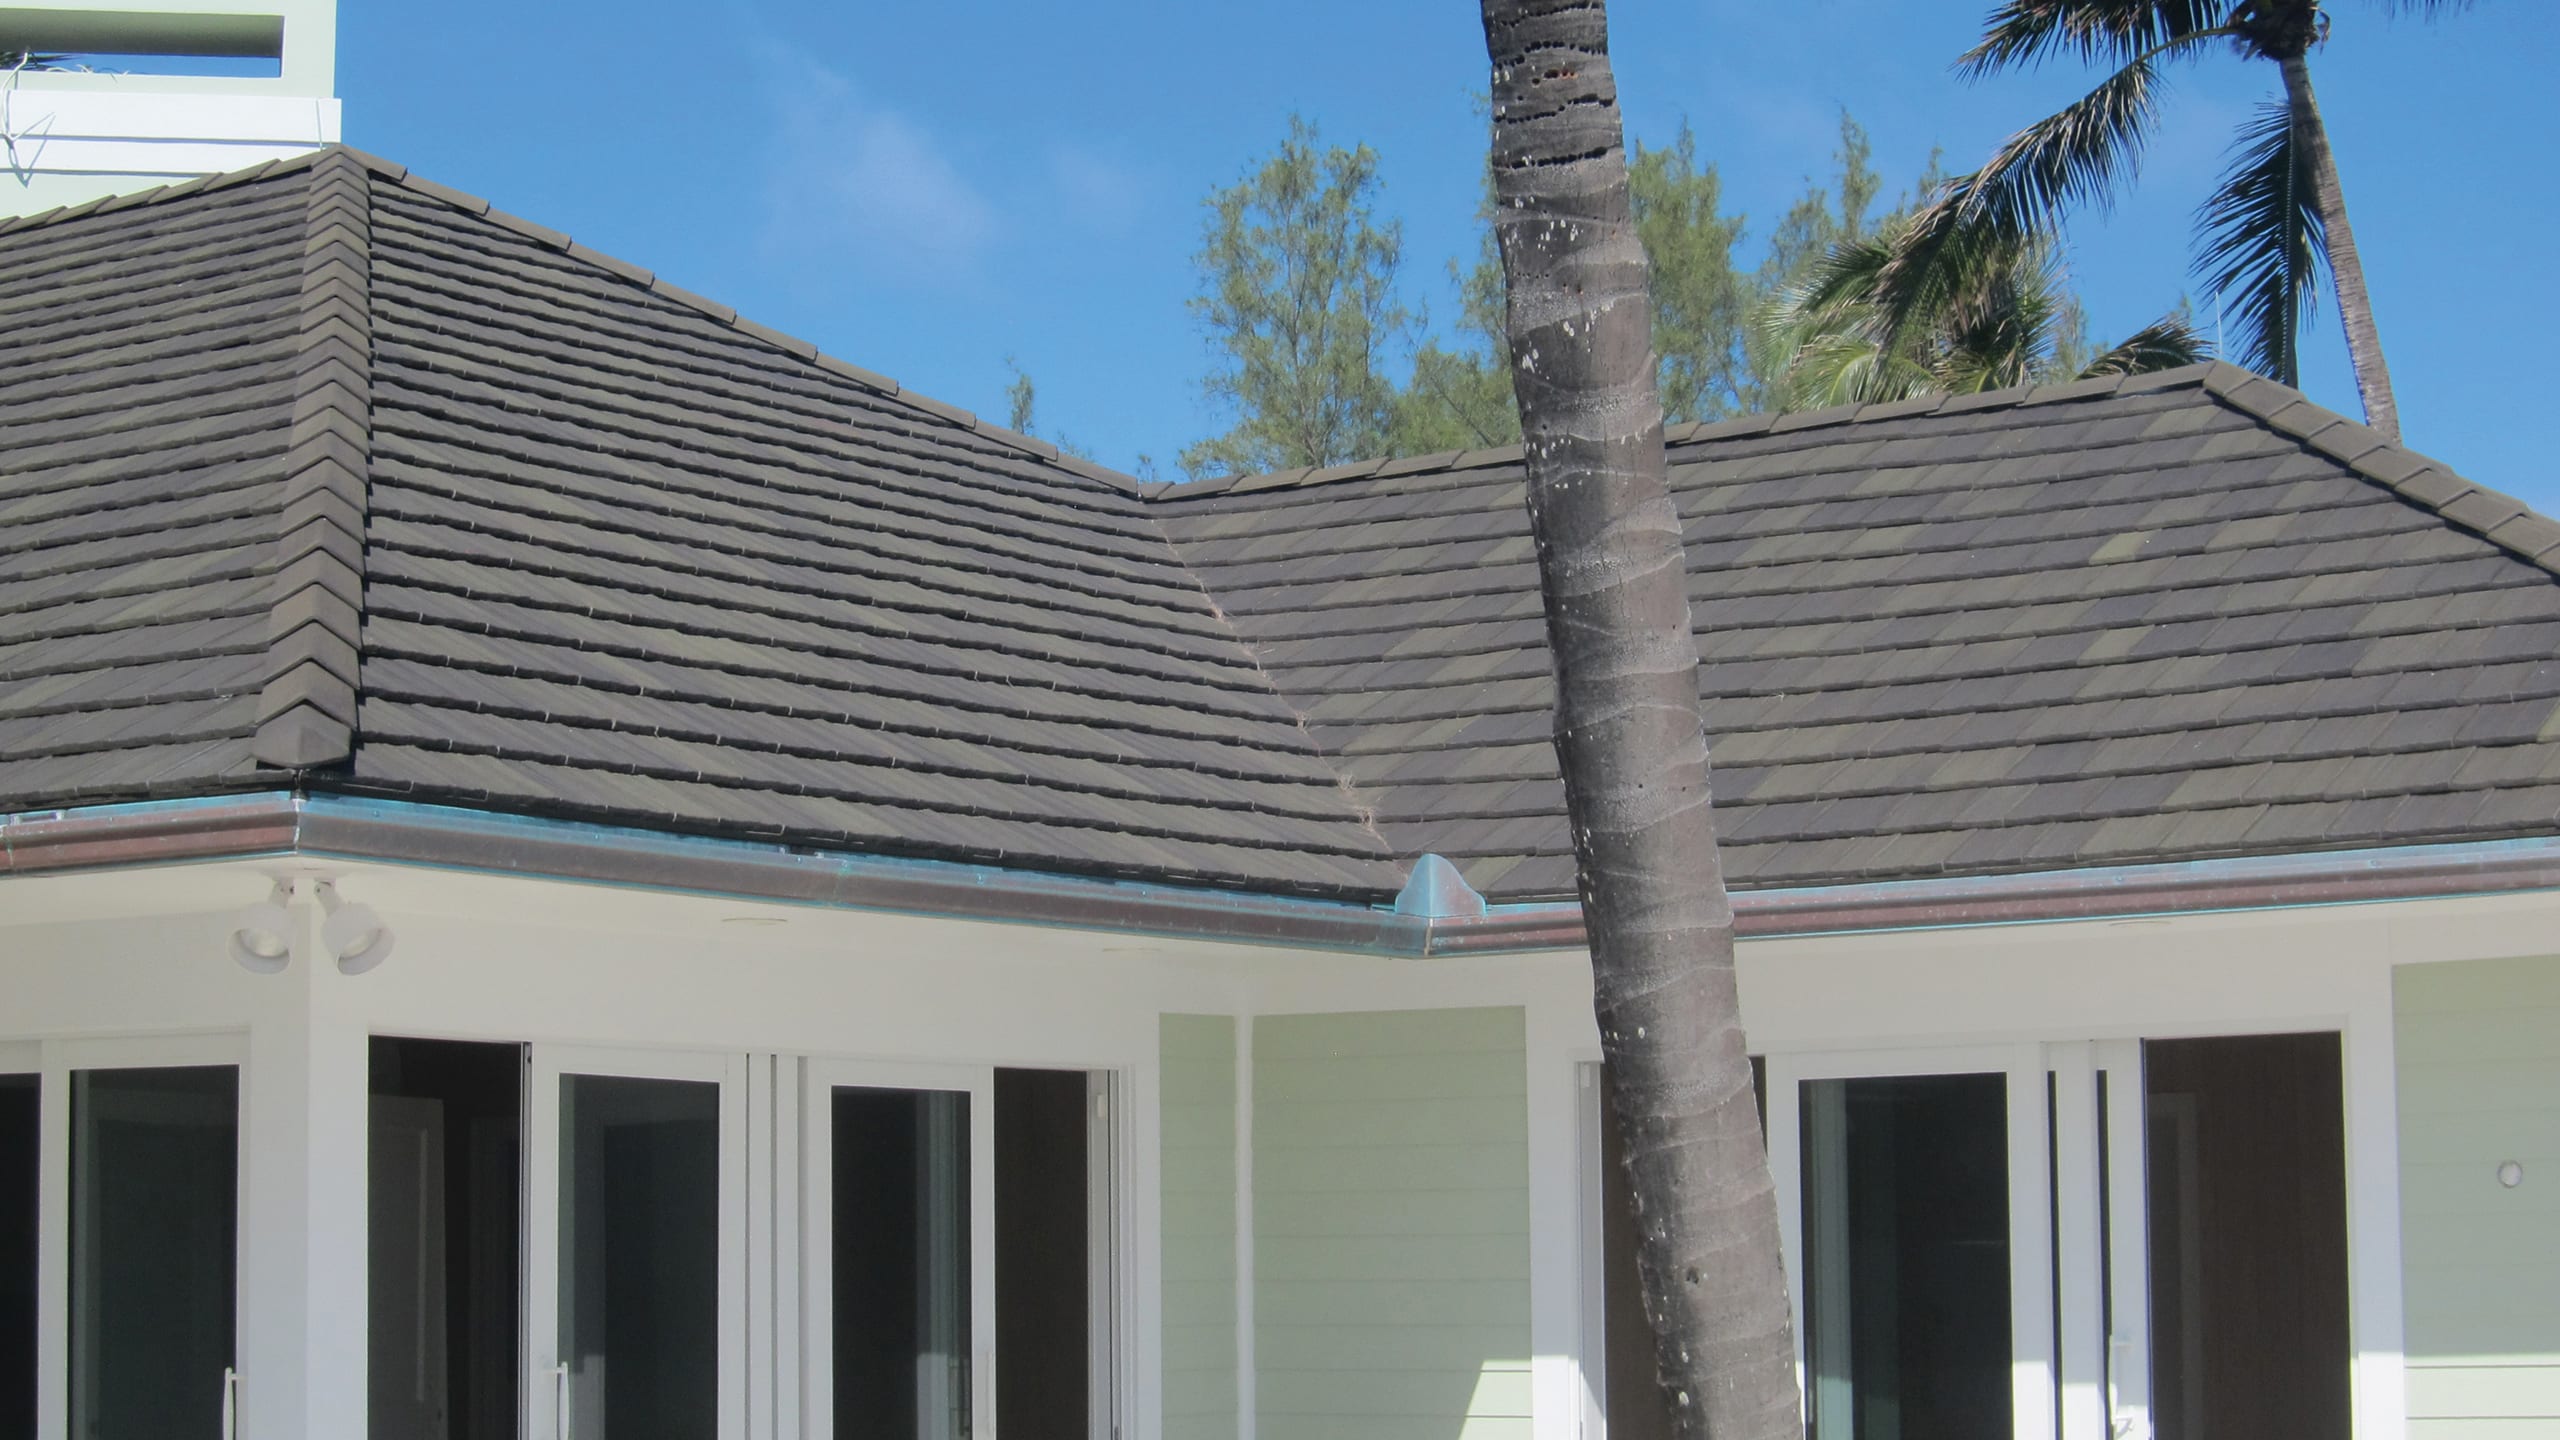 Private Residence in Jupiter Florida Featuring Ludowici Century Shake Clay Interlocking Roof Tile